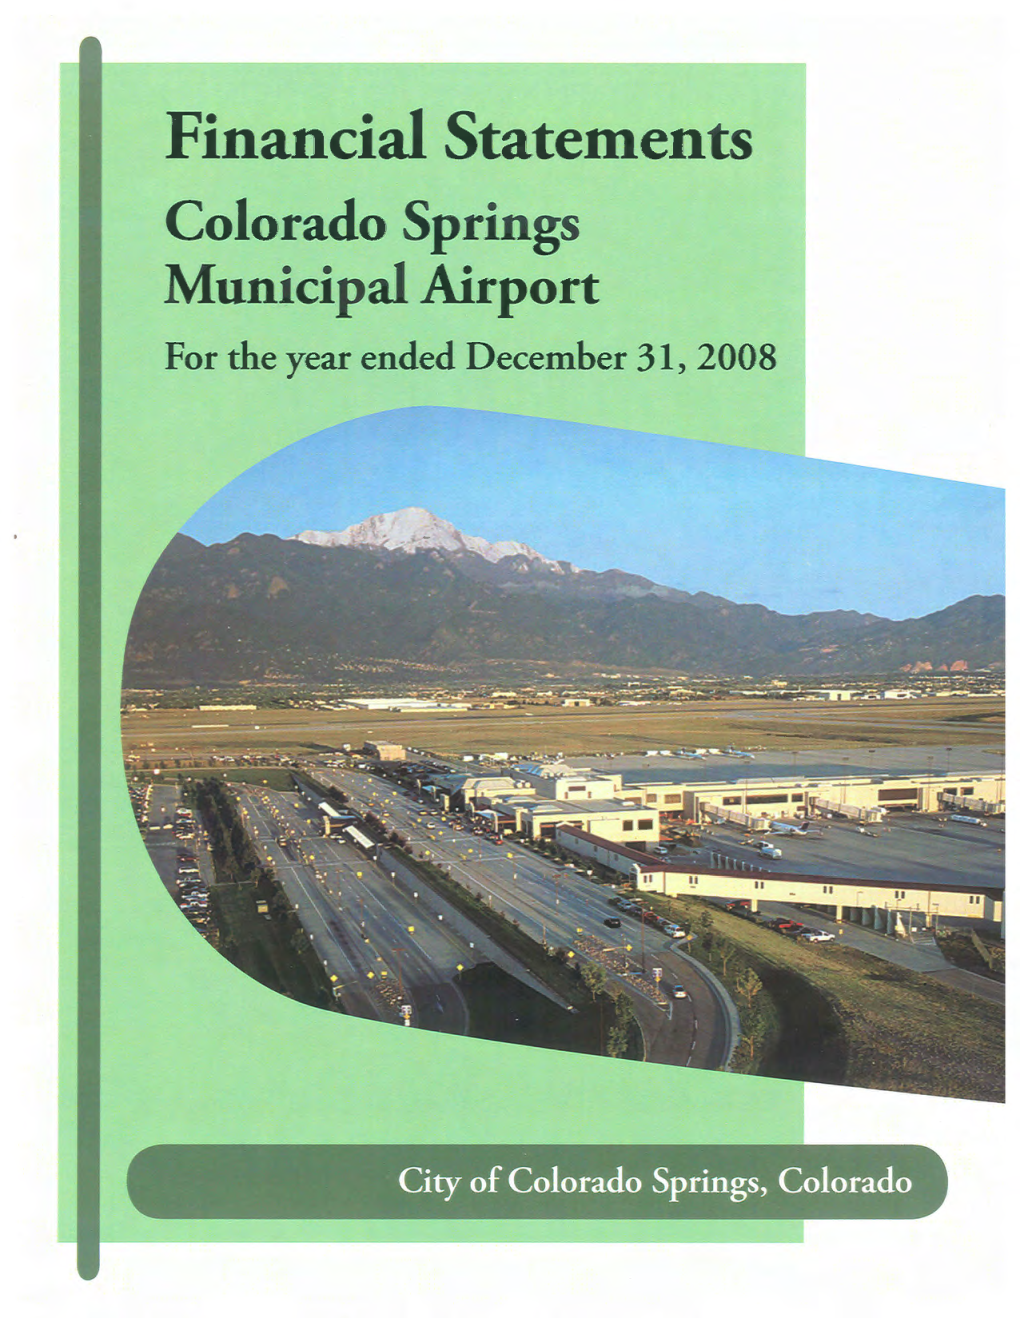 Financial Statements Colorado Springs Airport for 2008